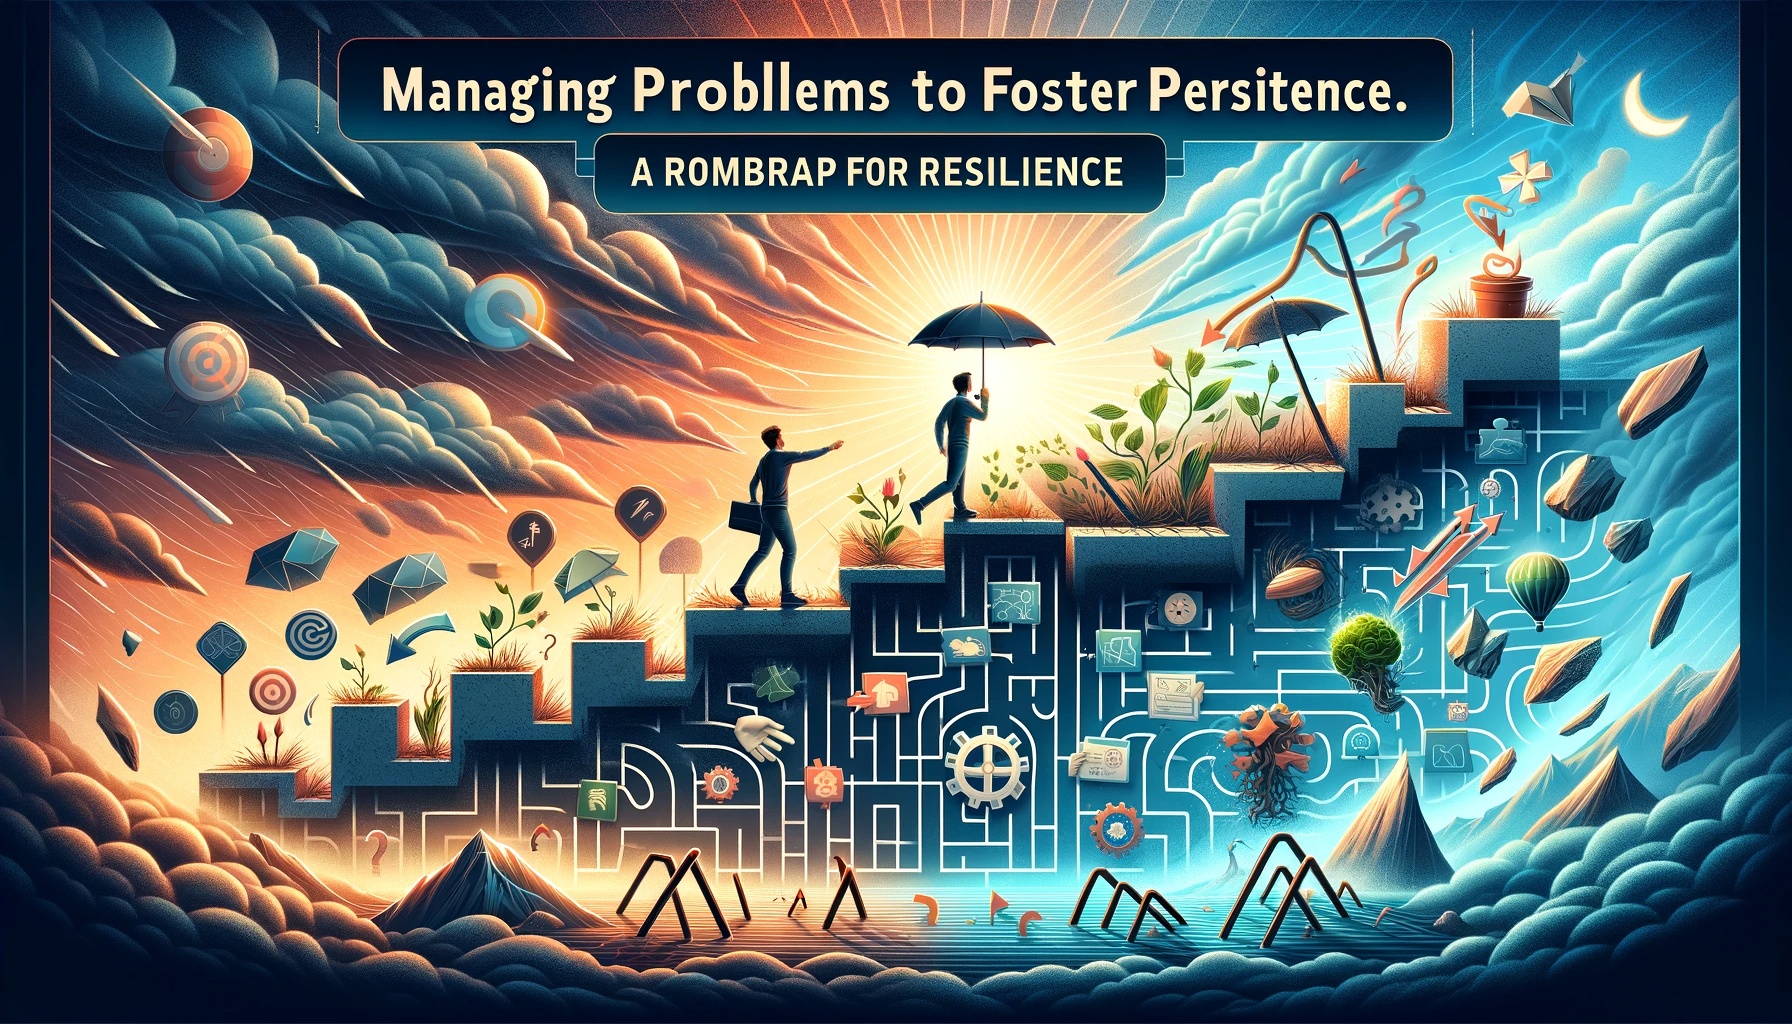 Managing Problems to Foster Persistence: A Roadmap for Resilience